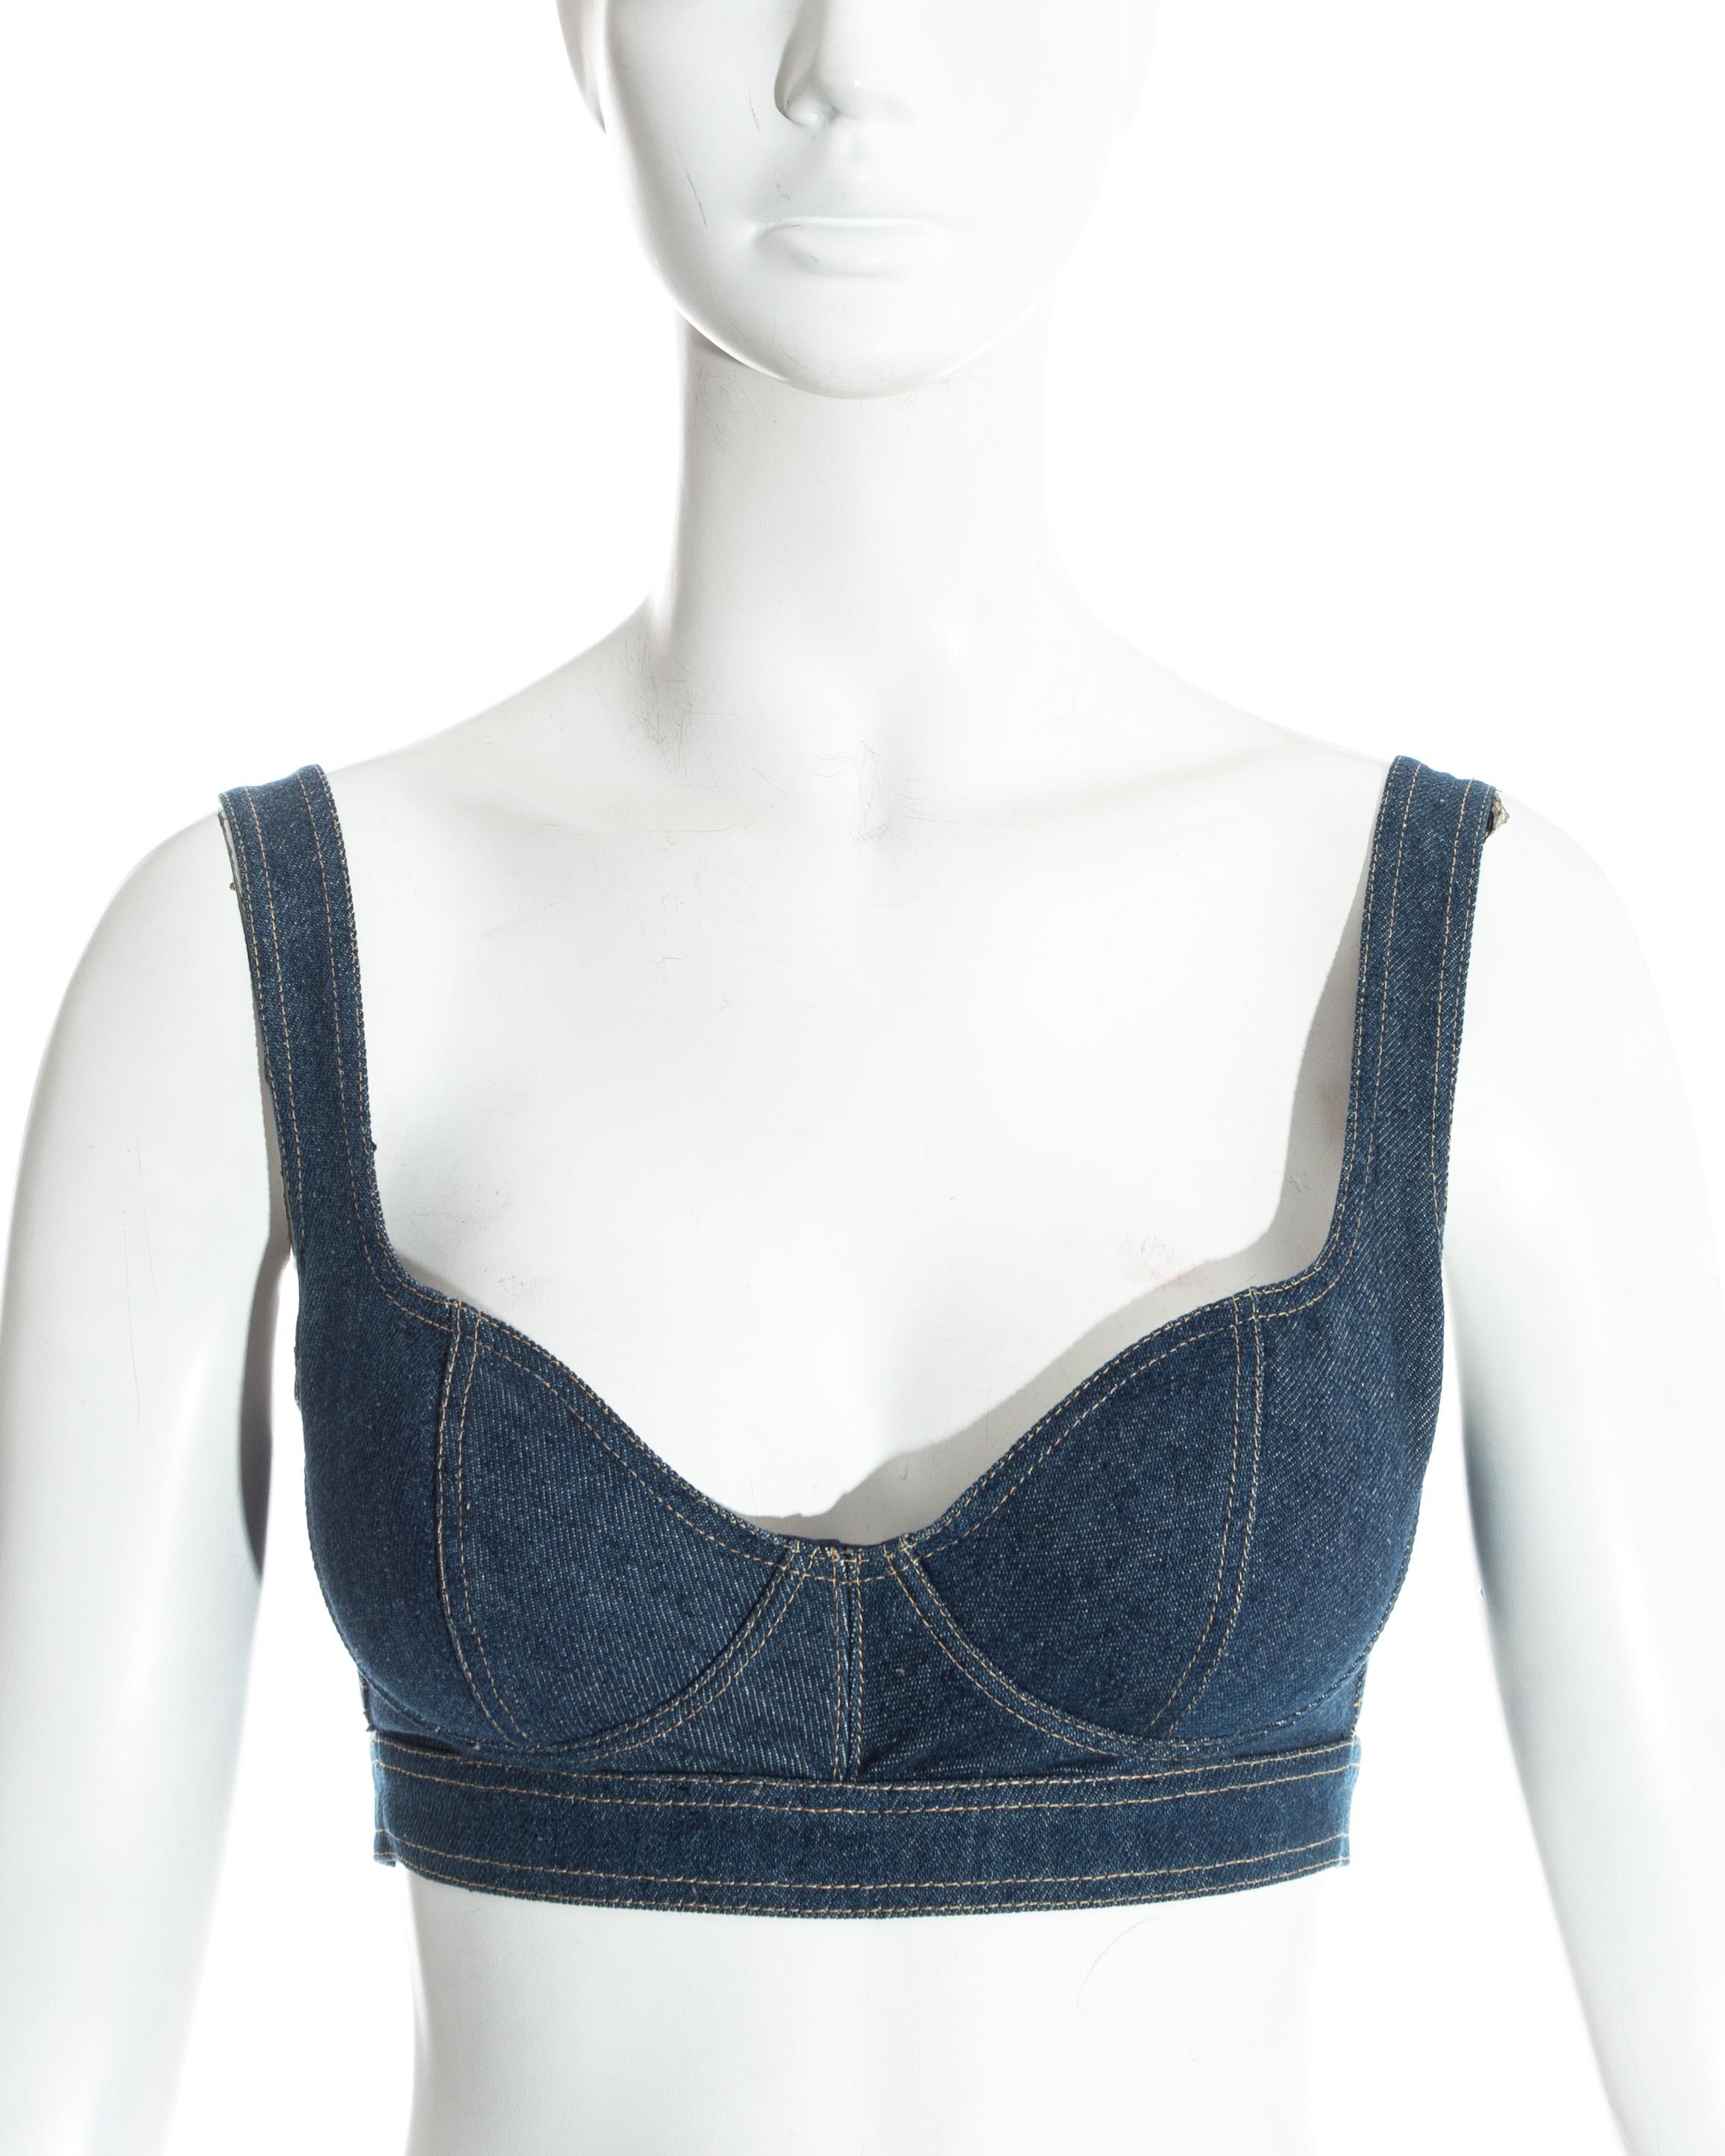 Azzedine Alaia blue denim padded bra with contrast stitch and 2 back straps with buckle fastenings.

Spring-Summer 1991